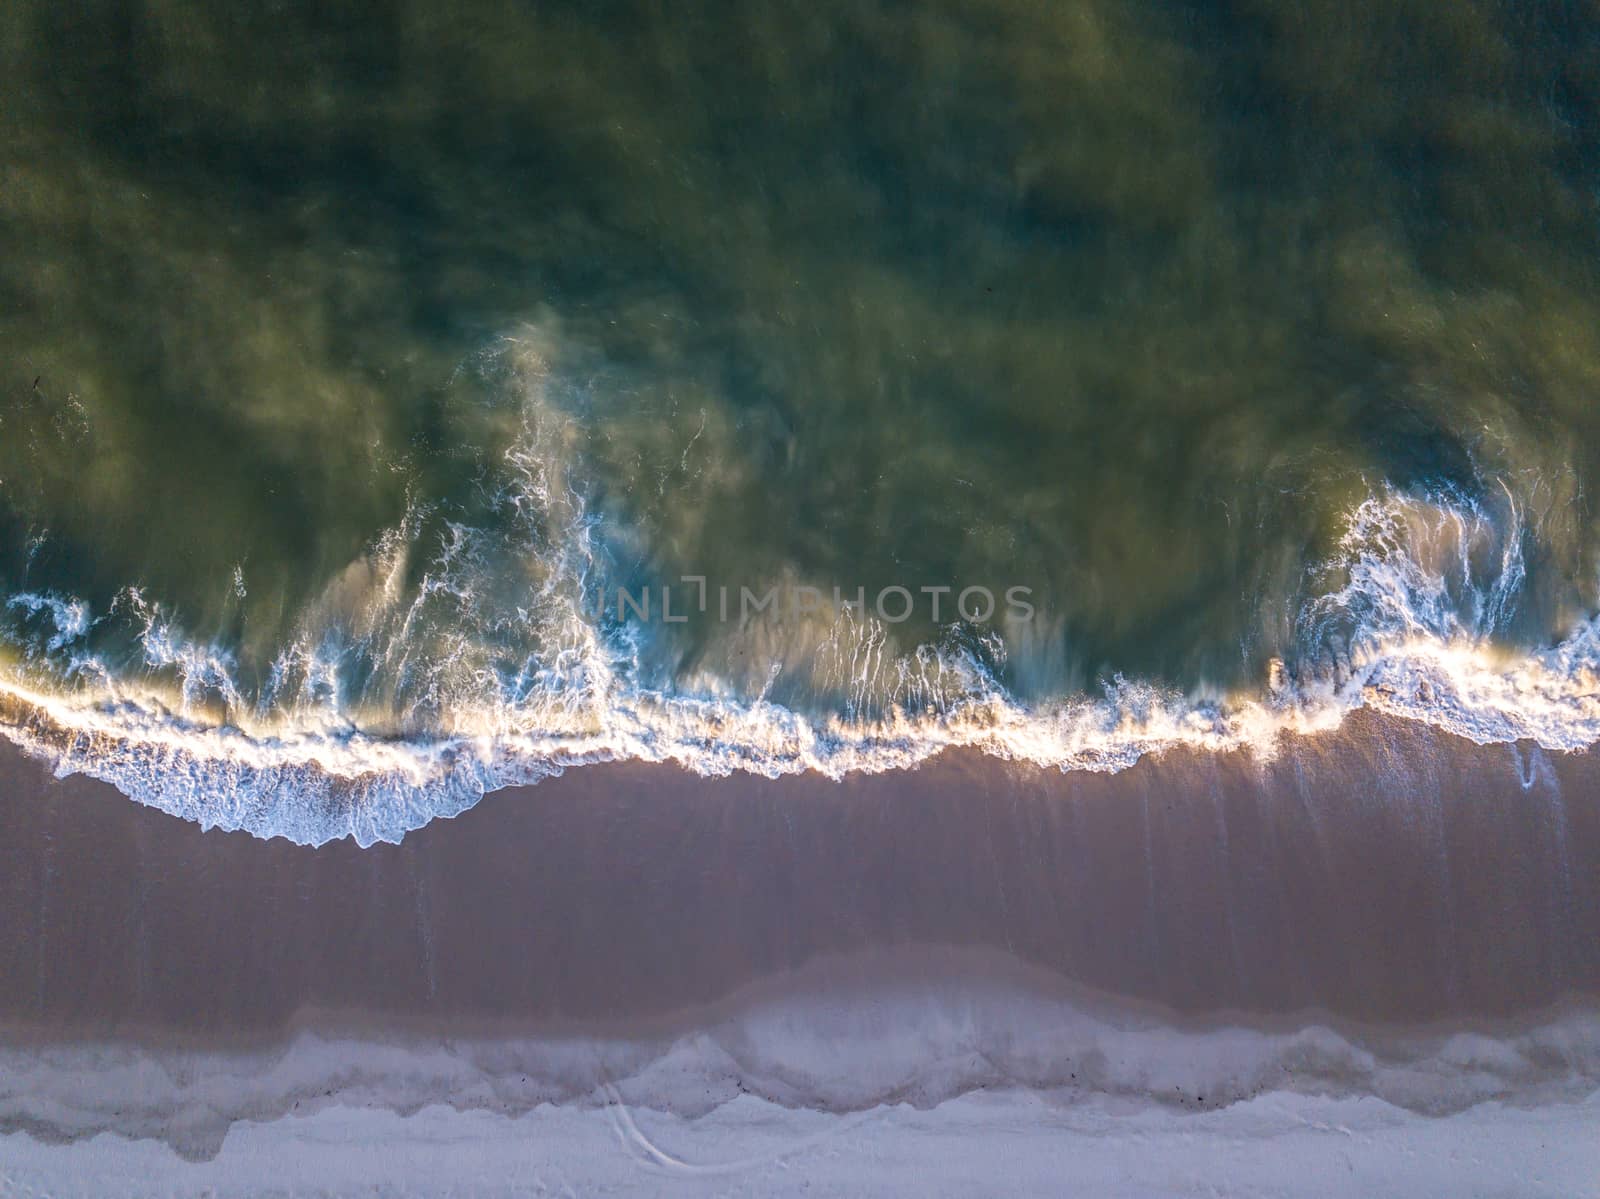 Drone picture of waves hitting the beach. by Simoneemanphotography